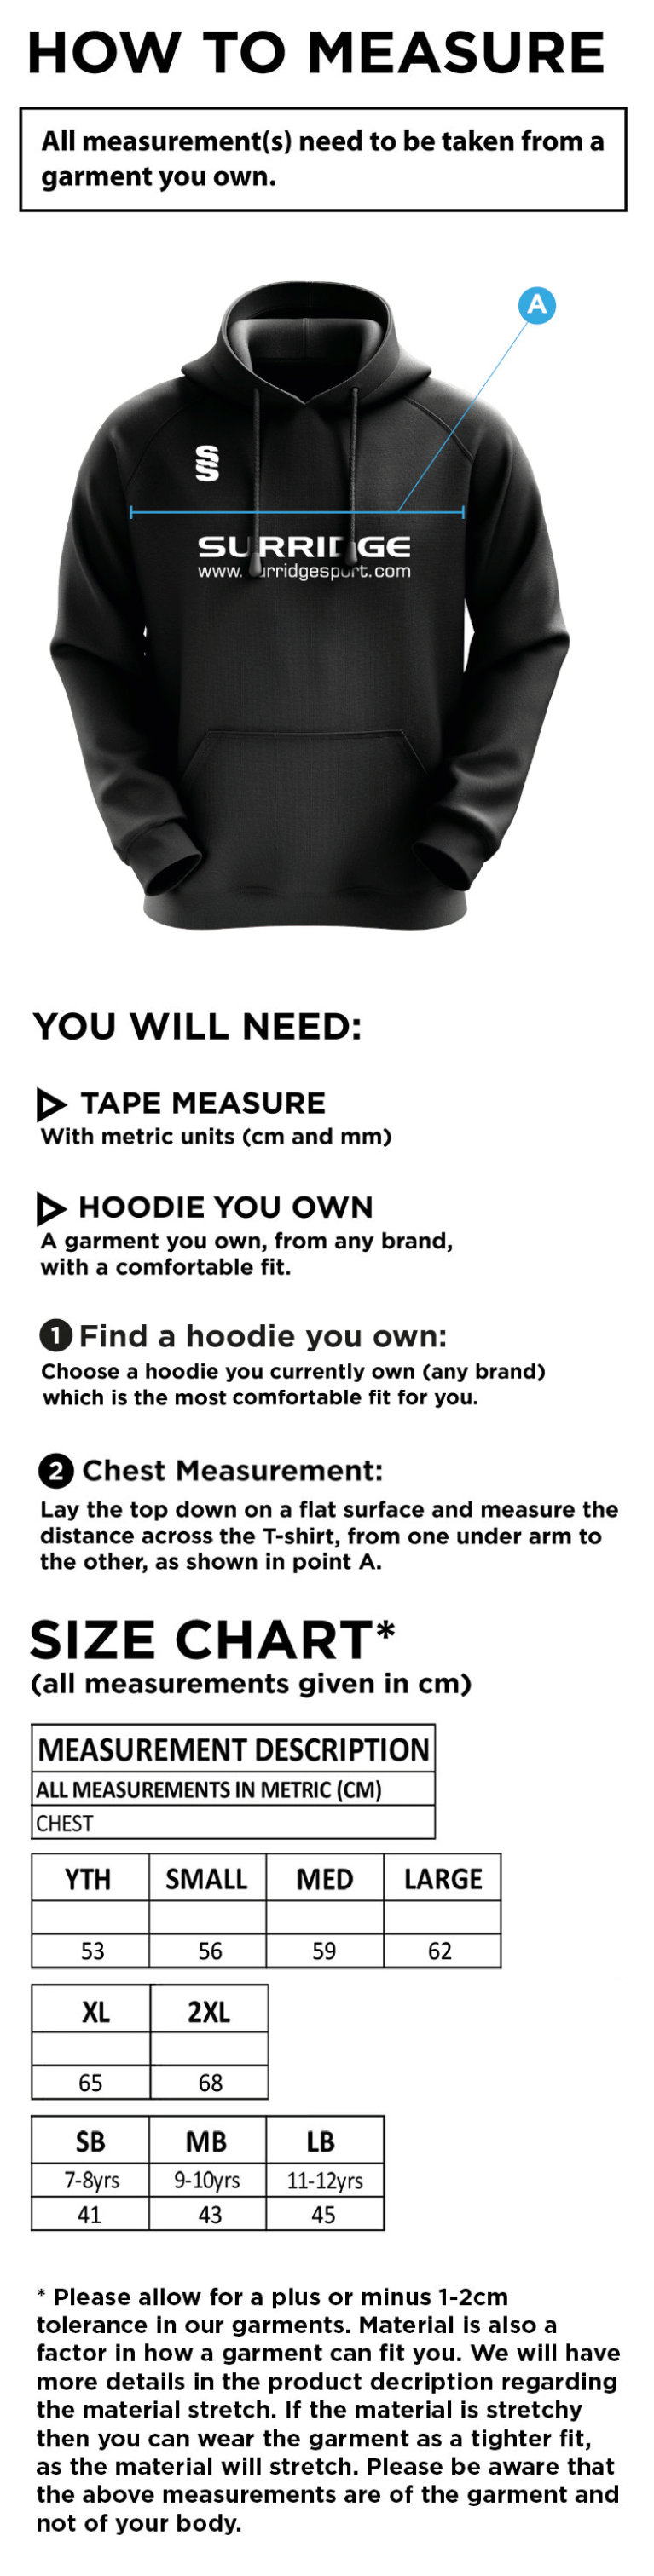 Sandy CC - Blade Hoody - Size Guide